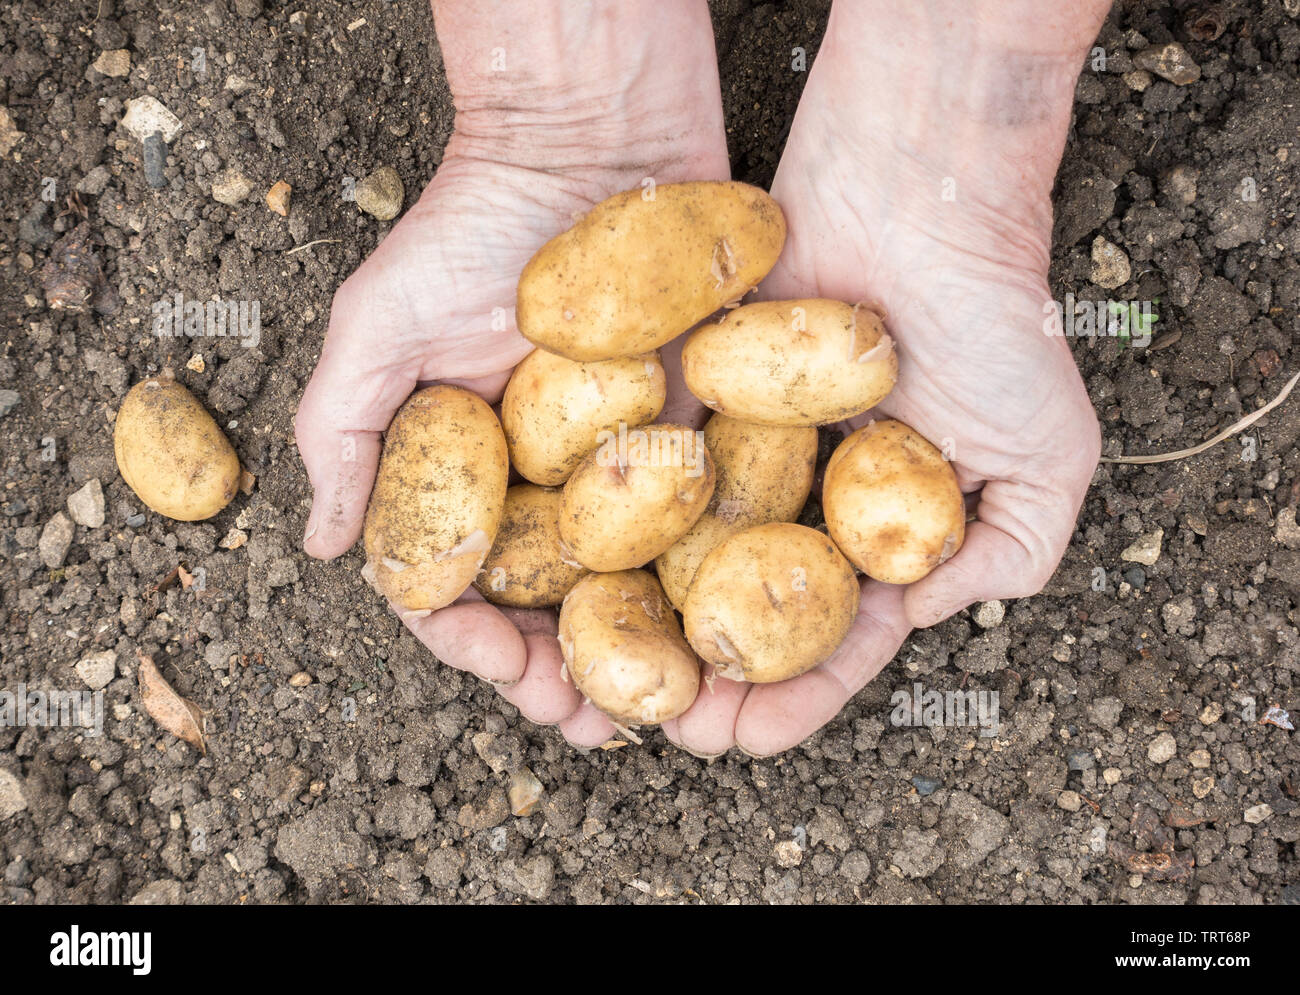 Jersey Royals patate primaticce Foto Stock